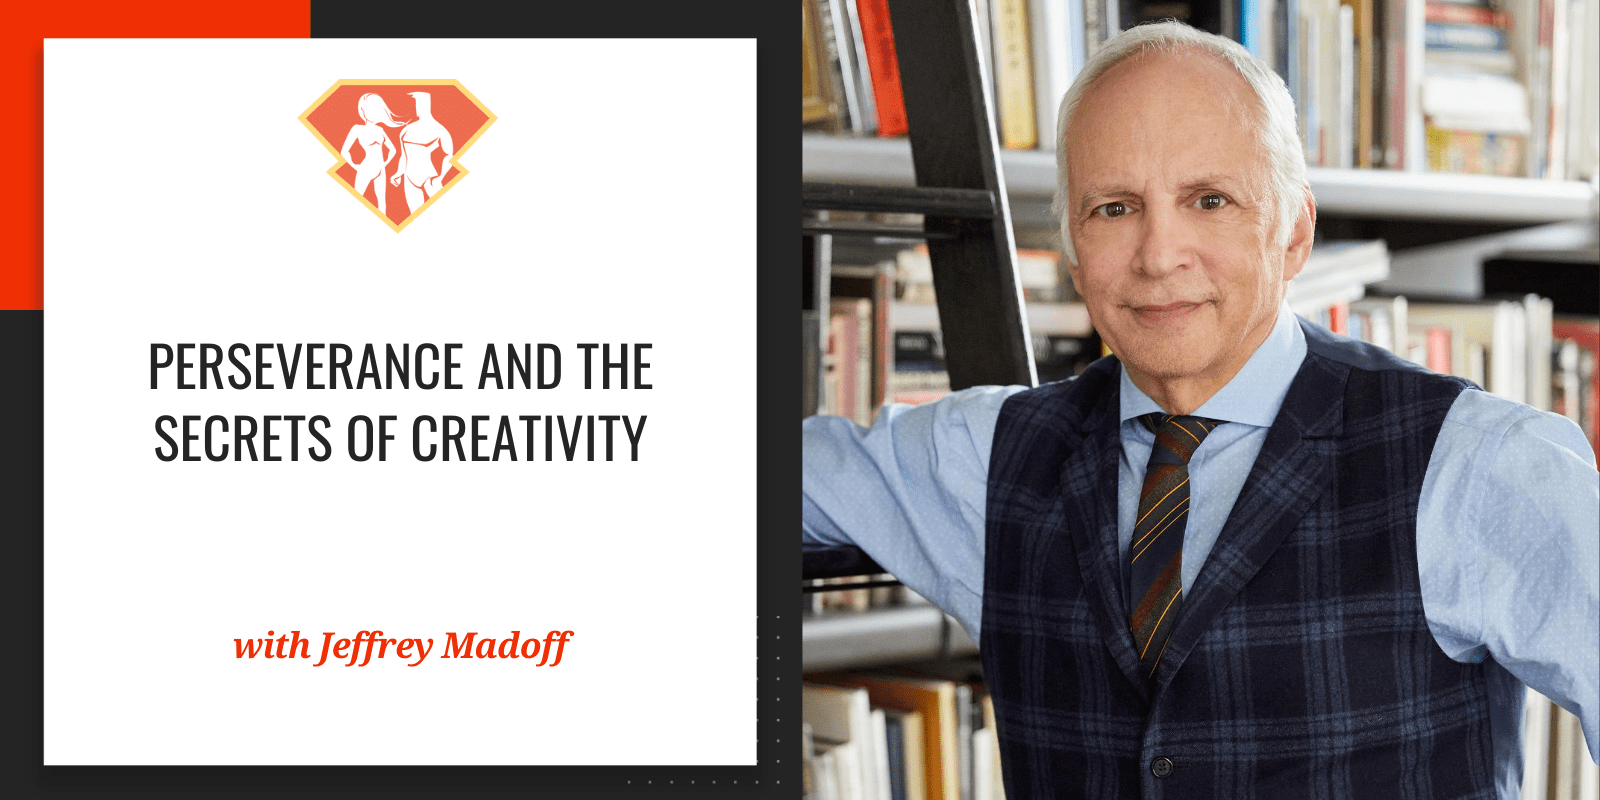 Jeffrey Madoff On Perseverance And The Secrets Of Creativity